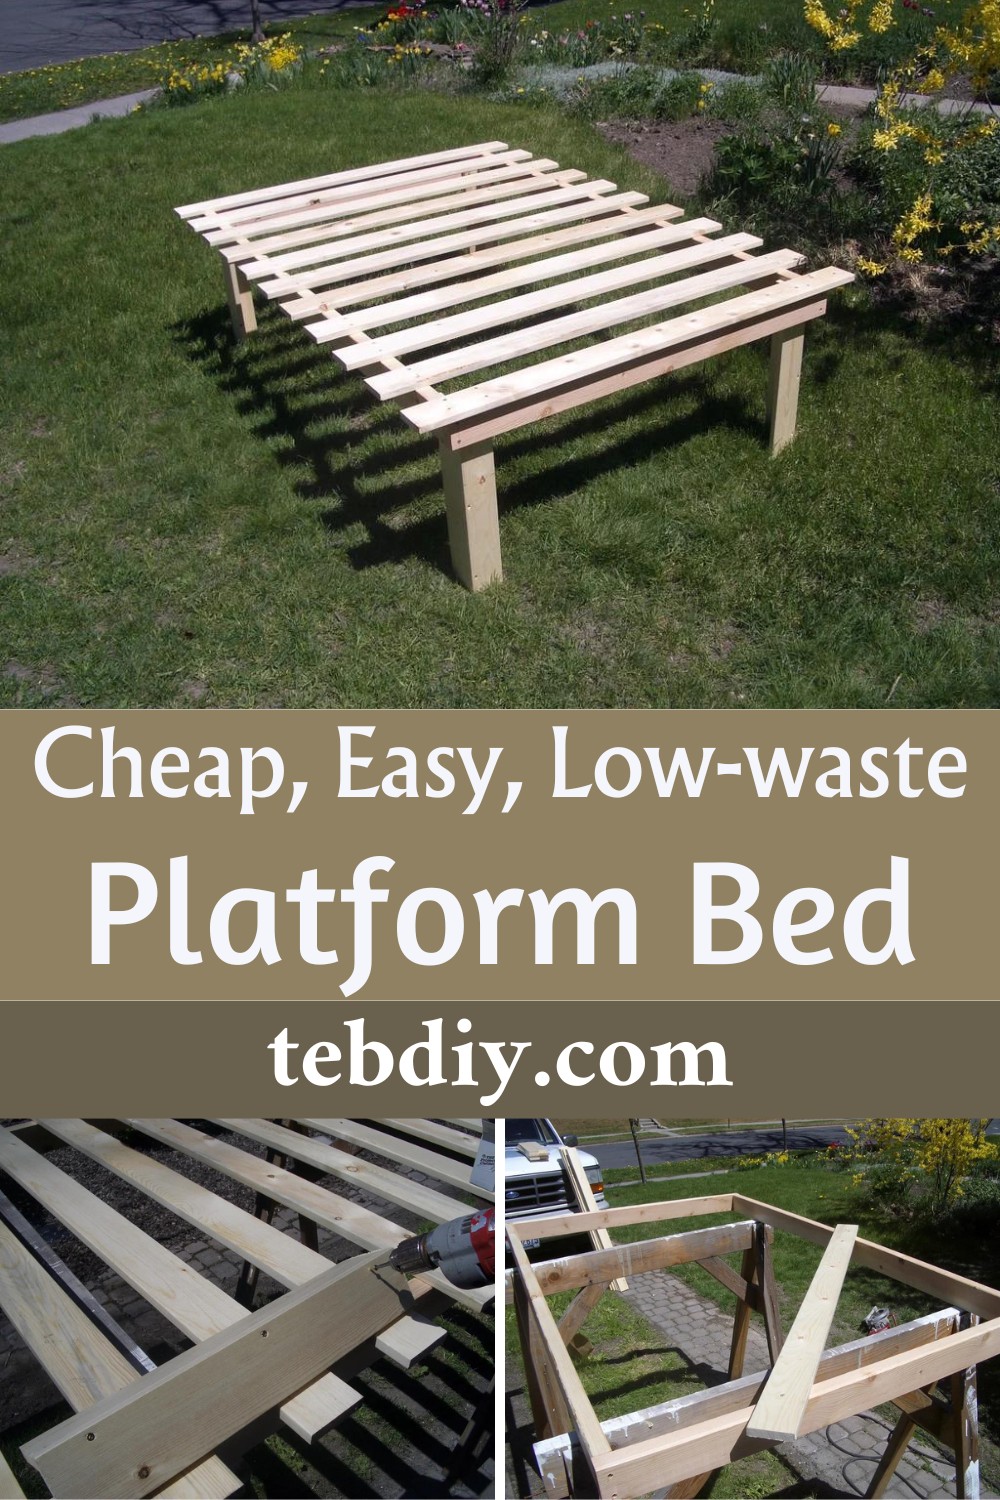 Cheap, Easy, Low-waste Platform Bed